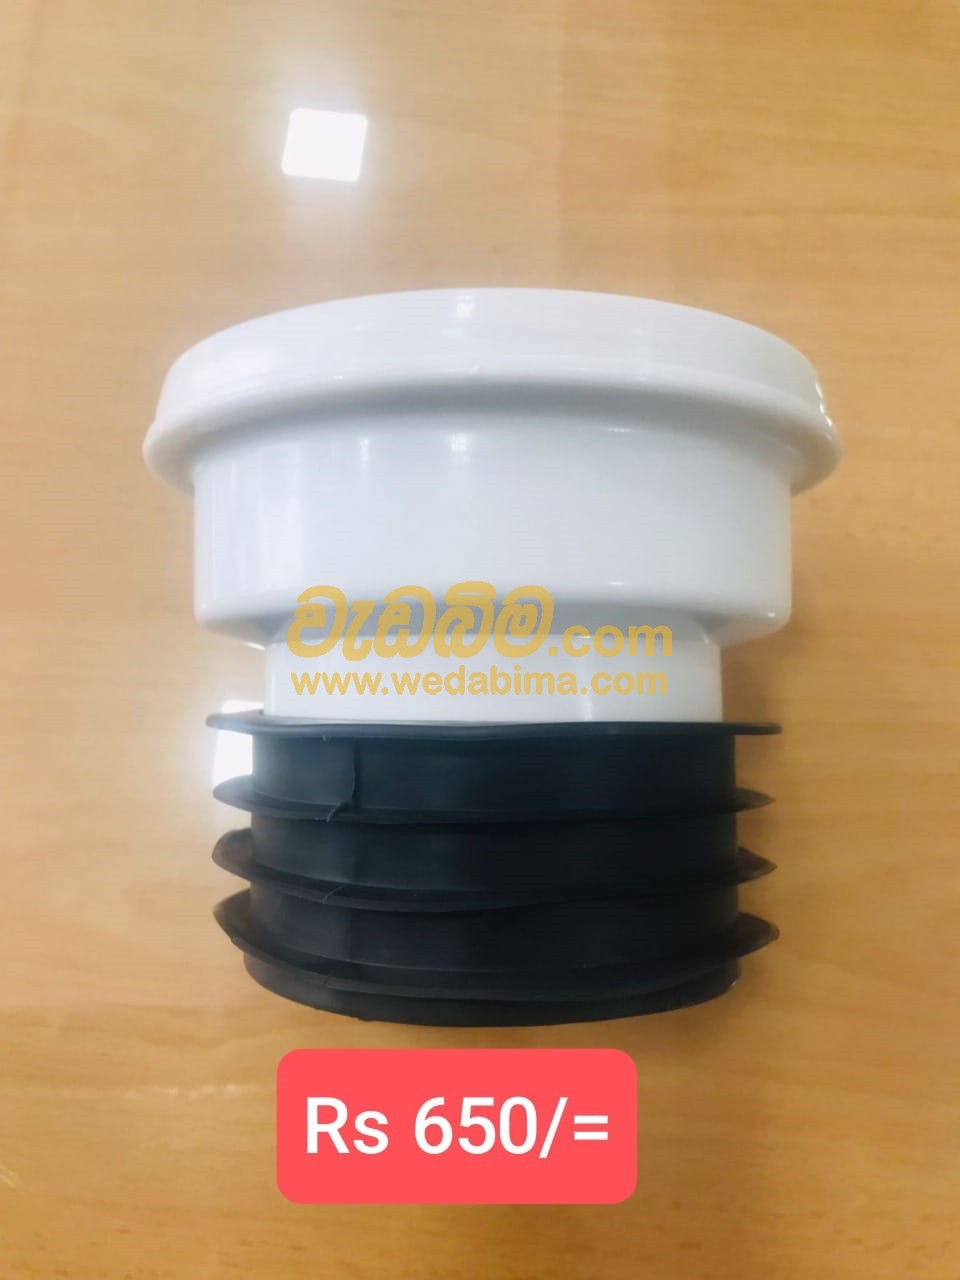 Bath Connector price in colombo